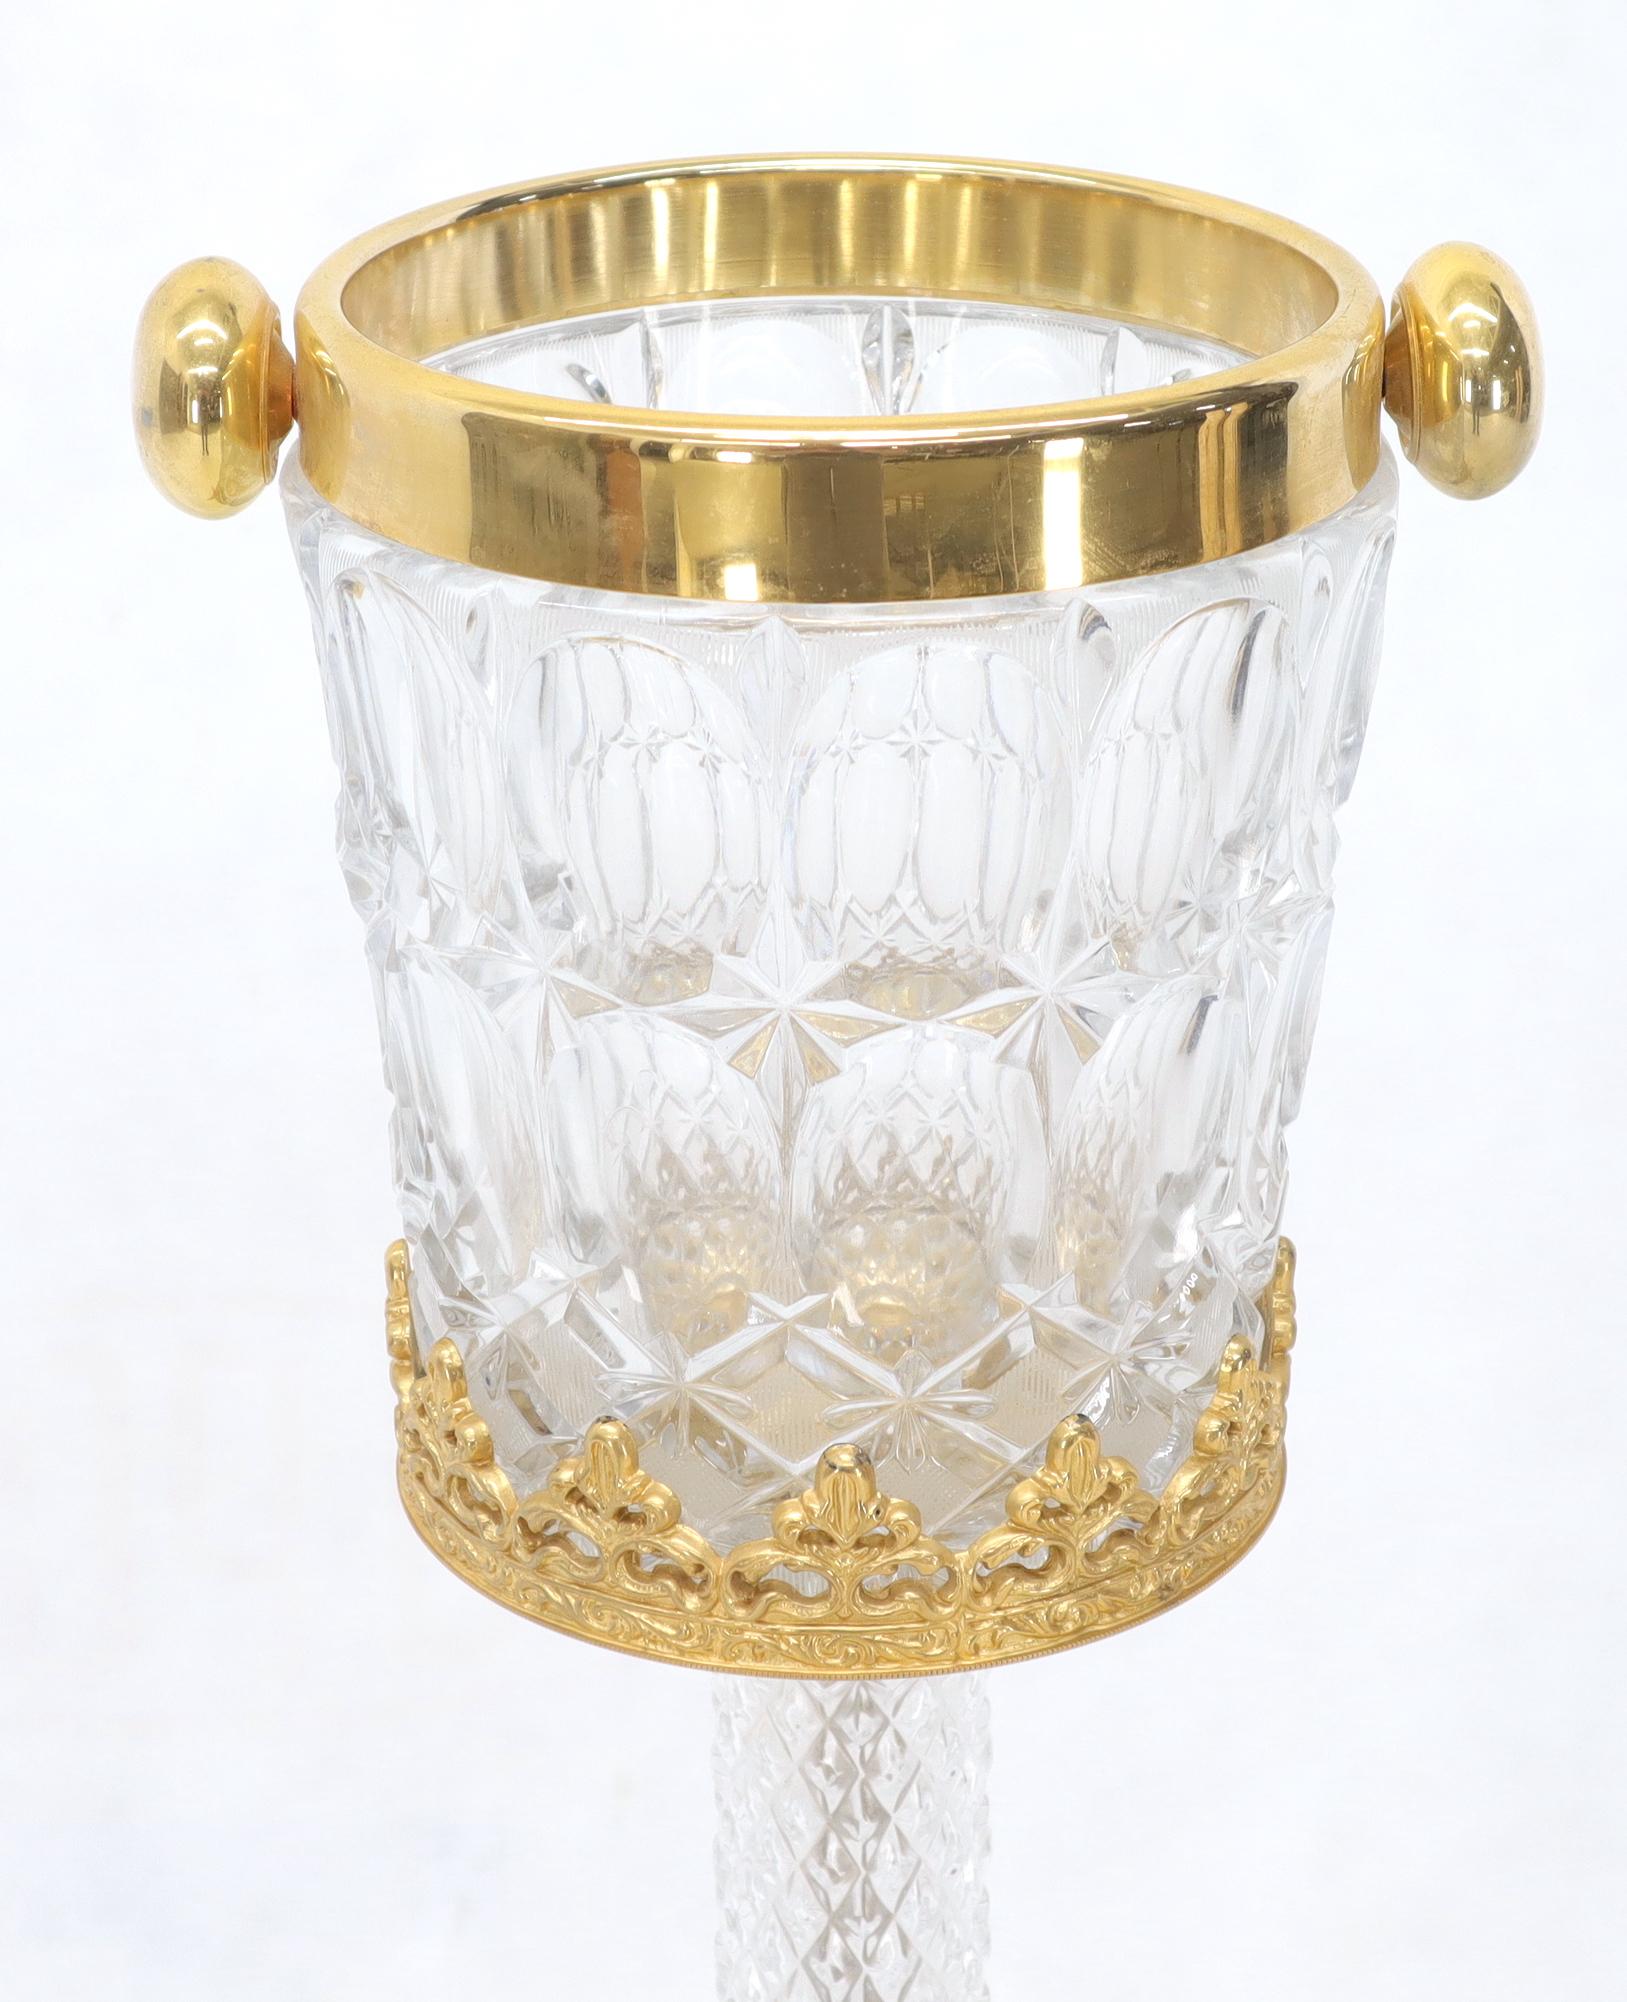 20th Century Italian 24-Karat Gold-Plated Cut Glass Champagne Stand Cooler Serving Bucket